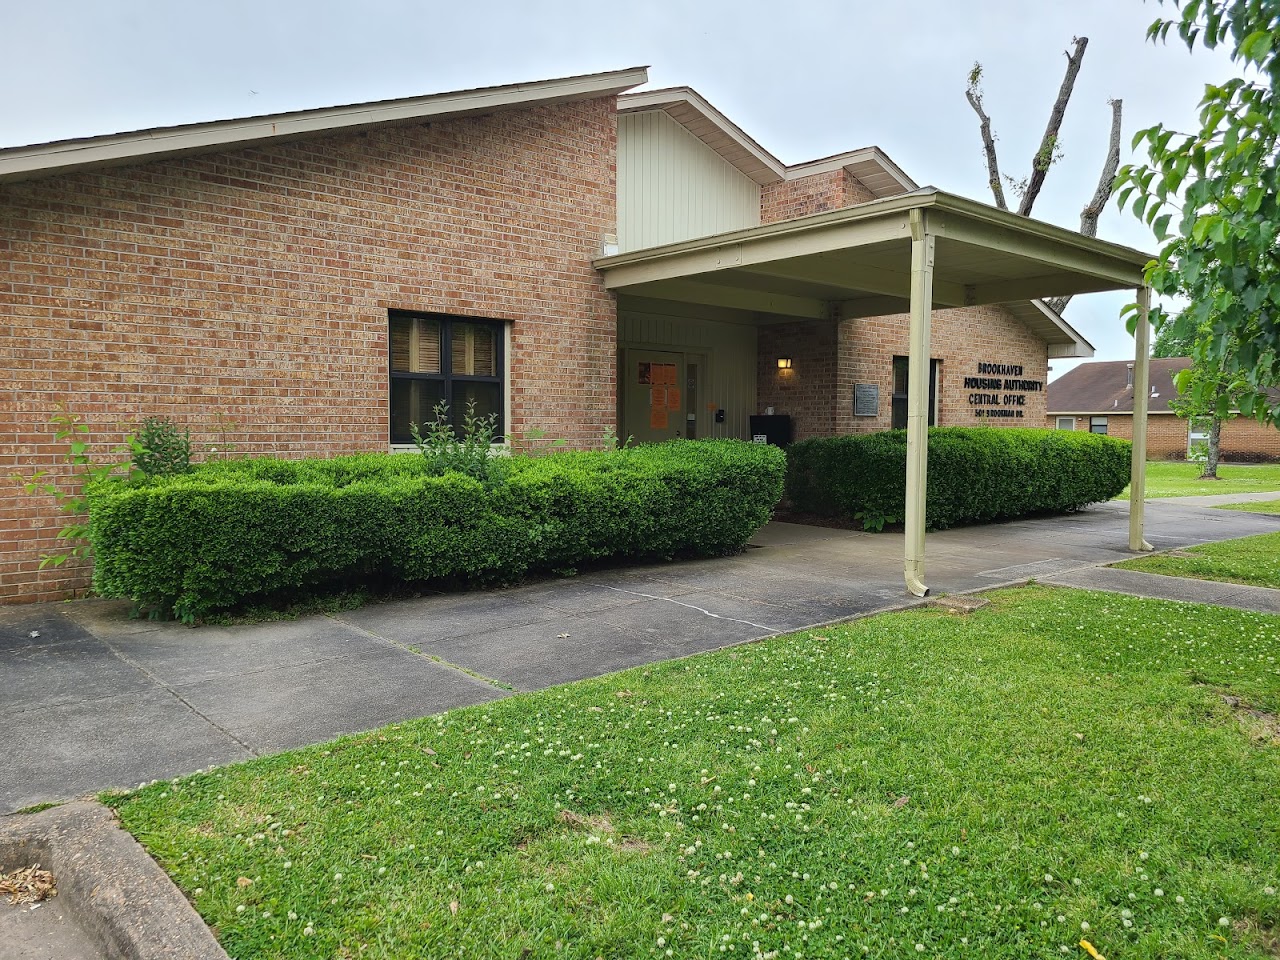 Photo of The Housing Authority of the City of Brookhaven. Affordable housing located at 501 BROOKMAN Drive BROOKHAVEN, MS 39601